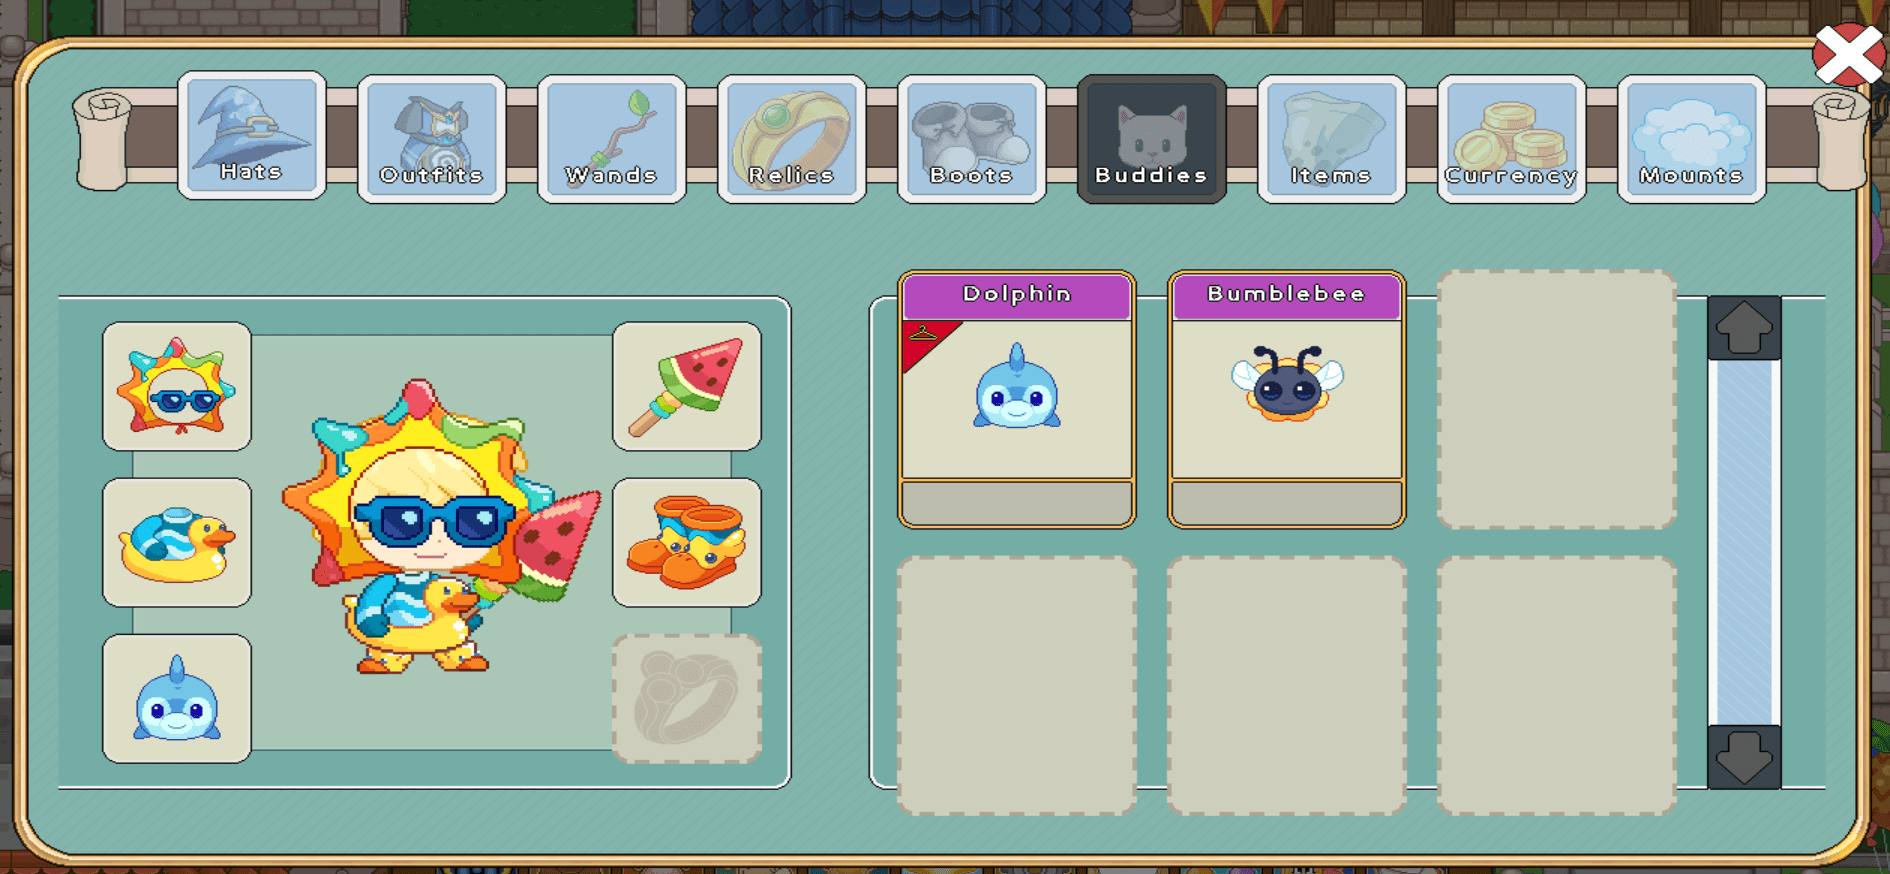 in-game image of the Summerfest shop and items